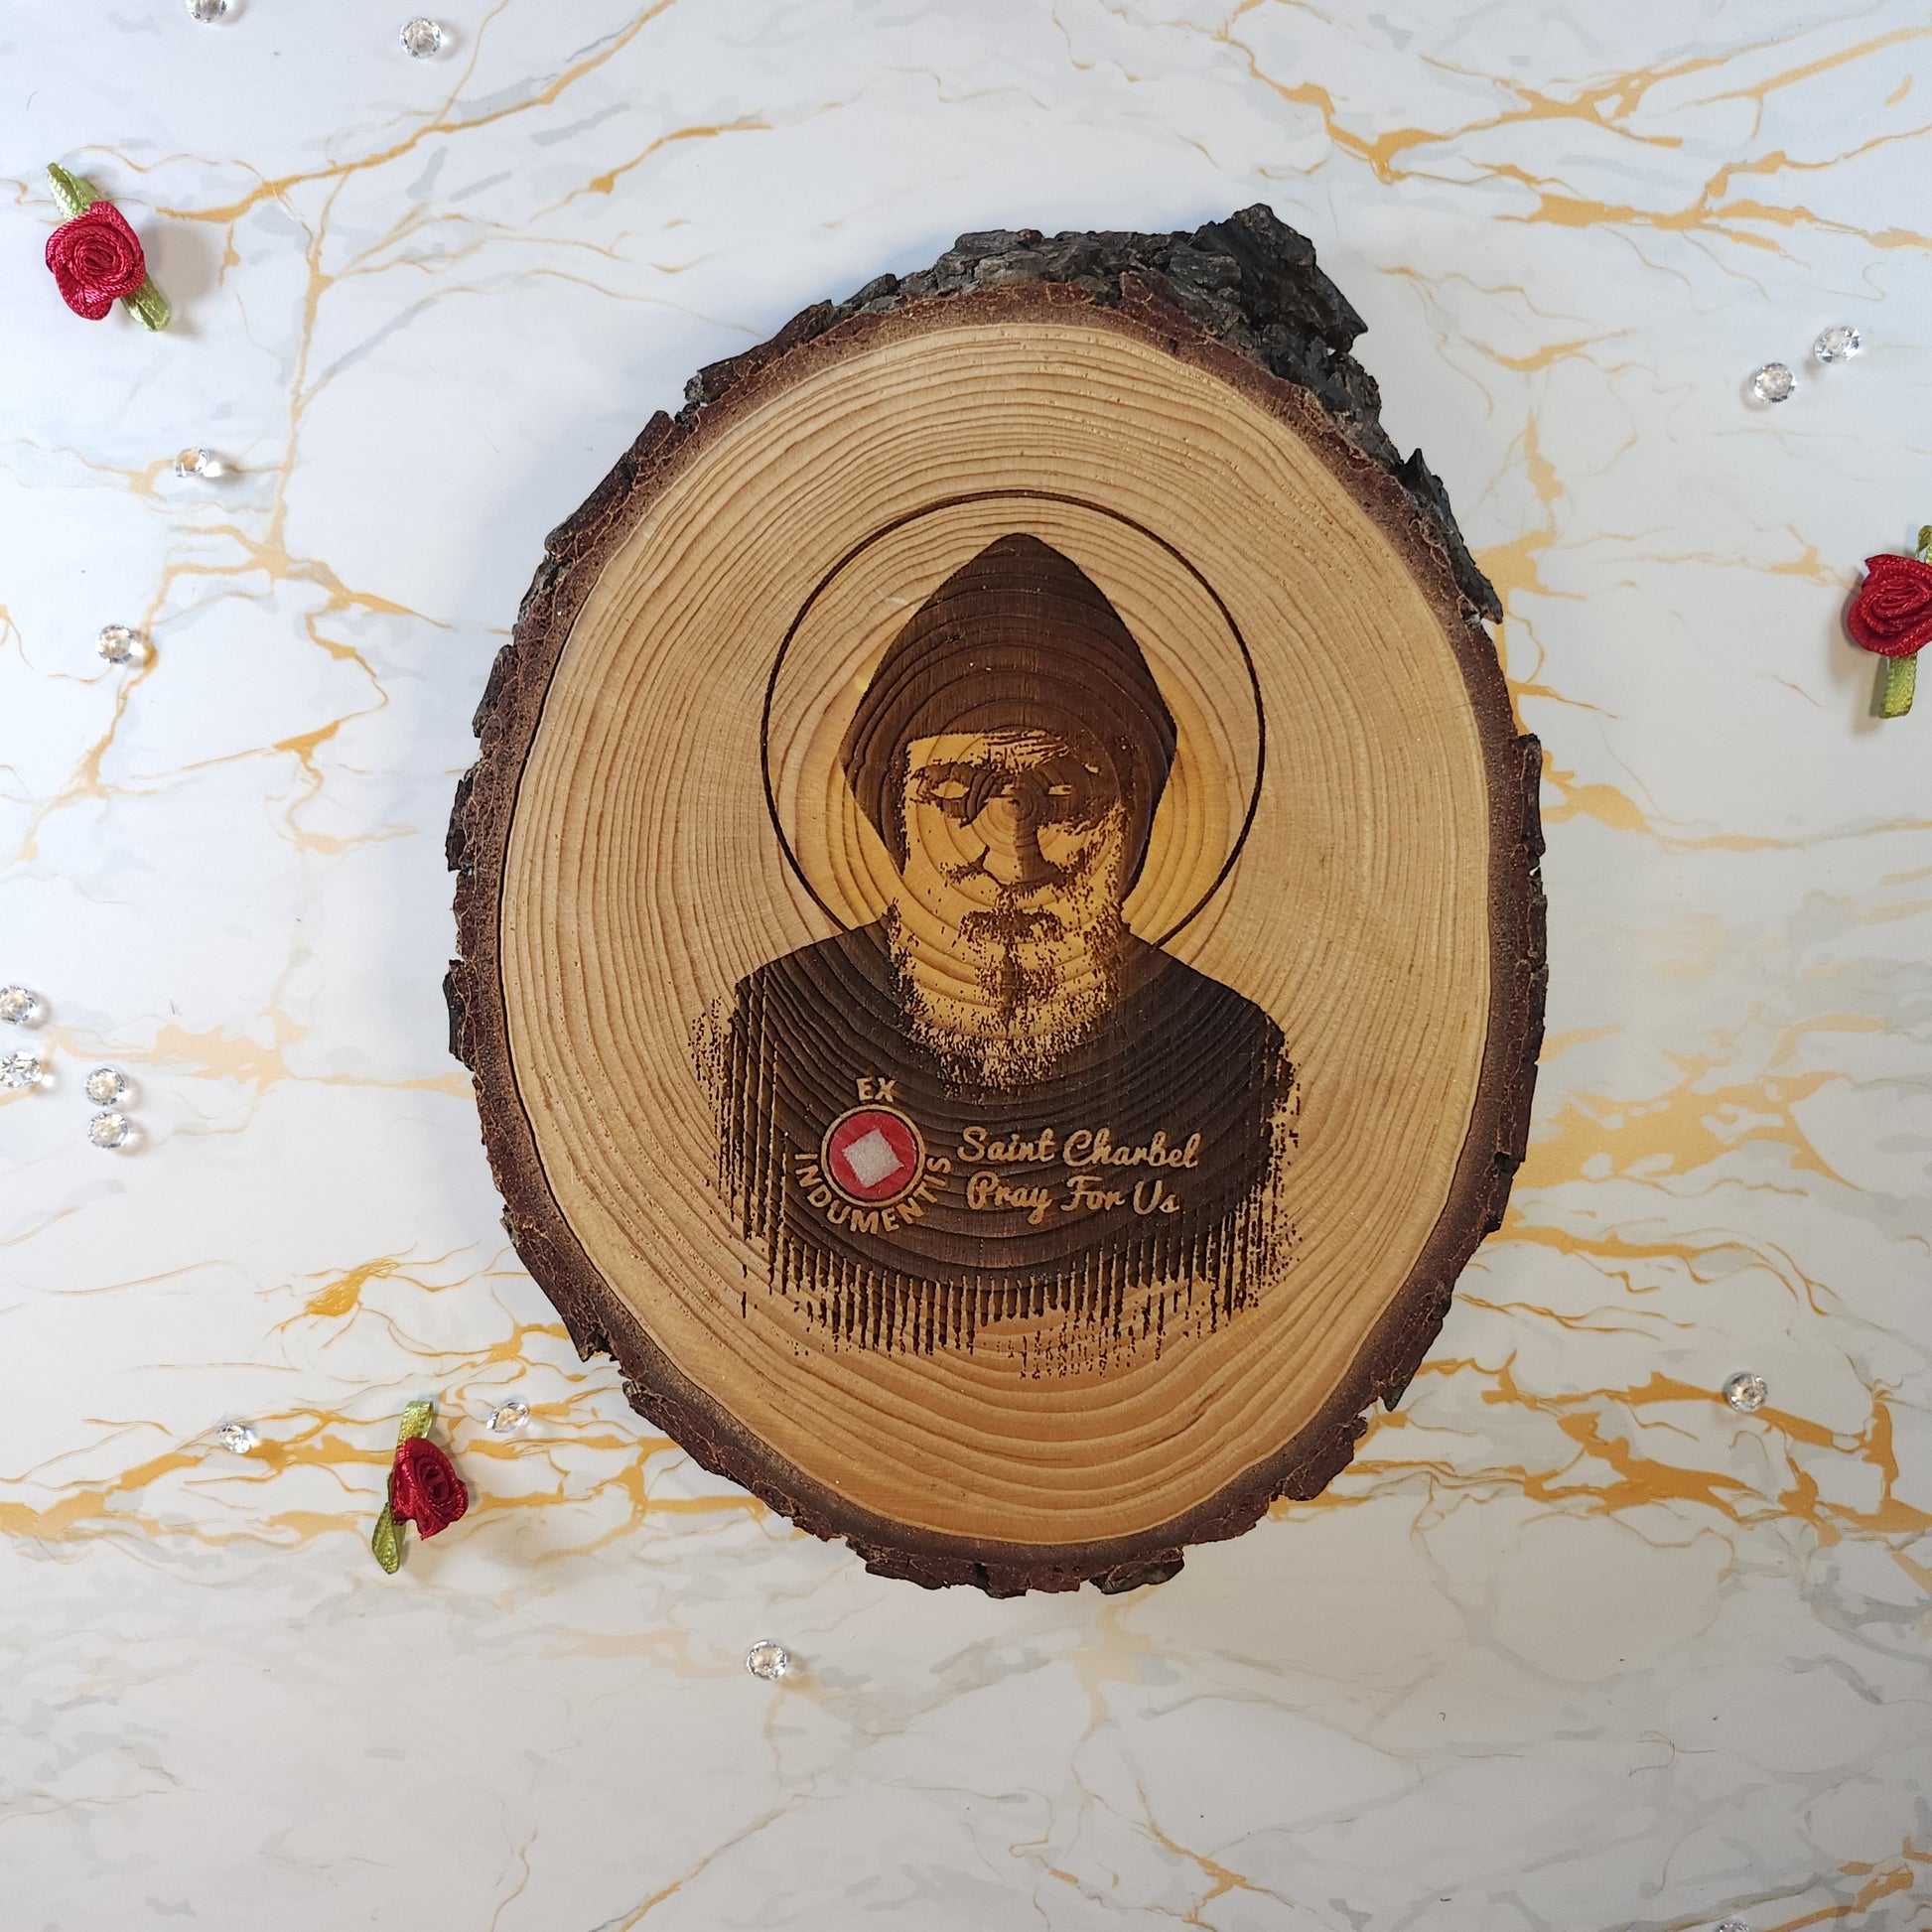 Saint Charbel, Cedar of Lebanon Box (Ex Indumentis) - Our Lady of Gifts